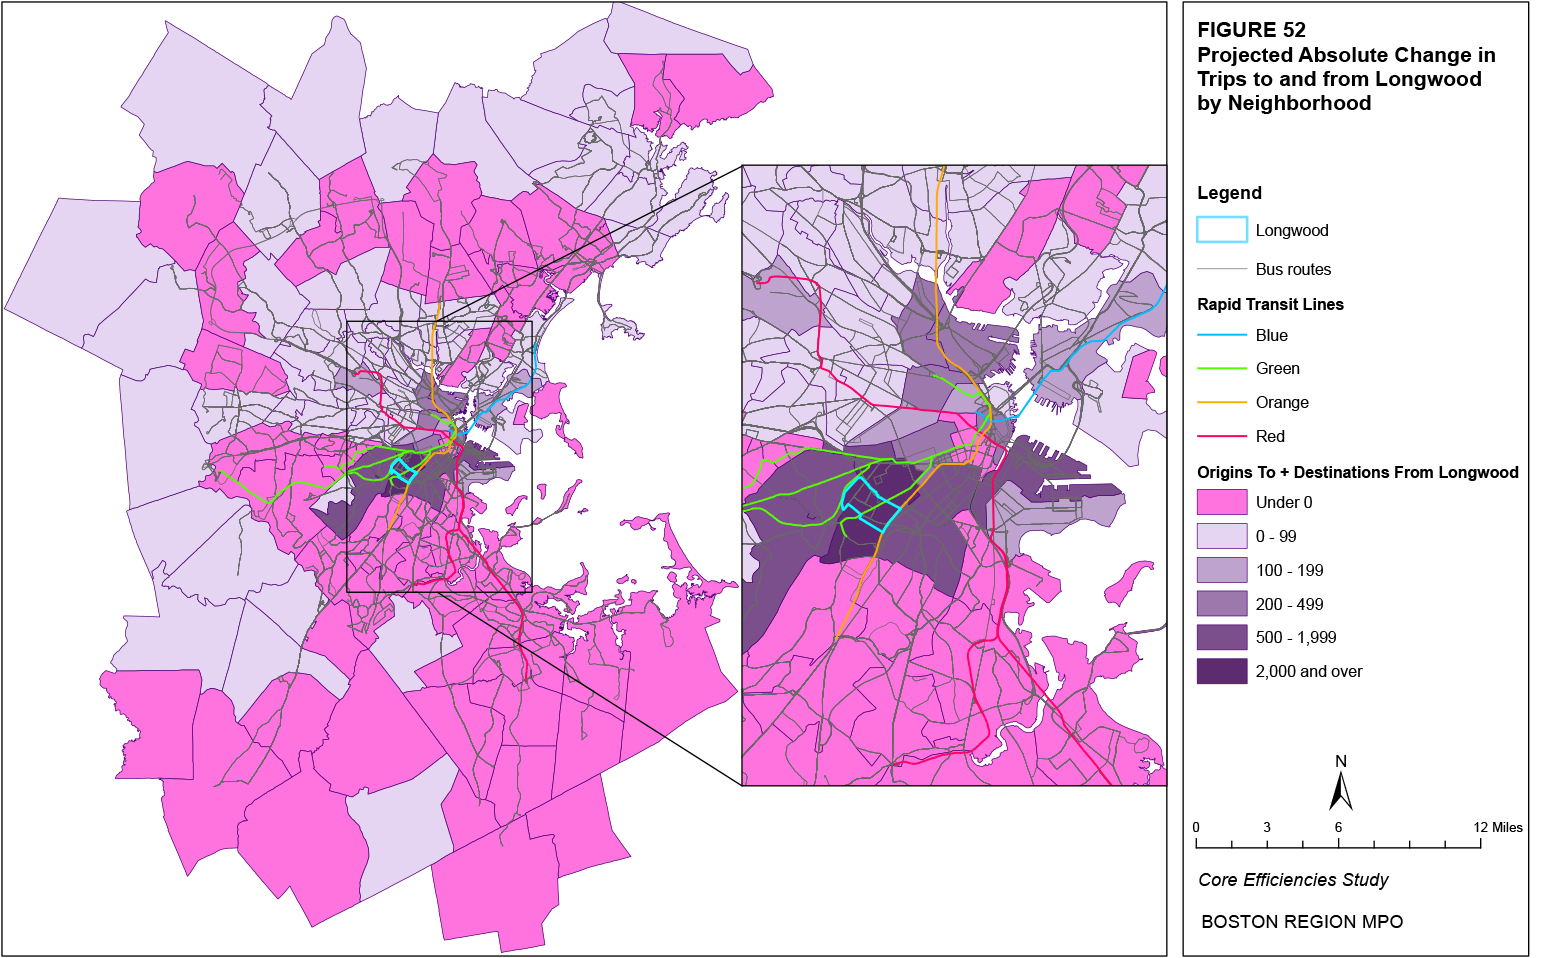 This map shows the projected absolute change in trips to and from the Longwood neighborhood by neighborhood.